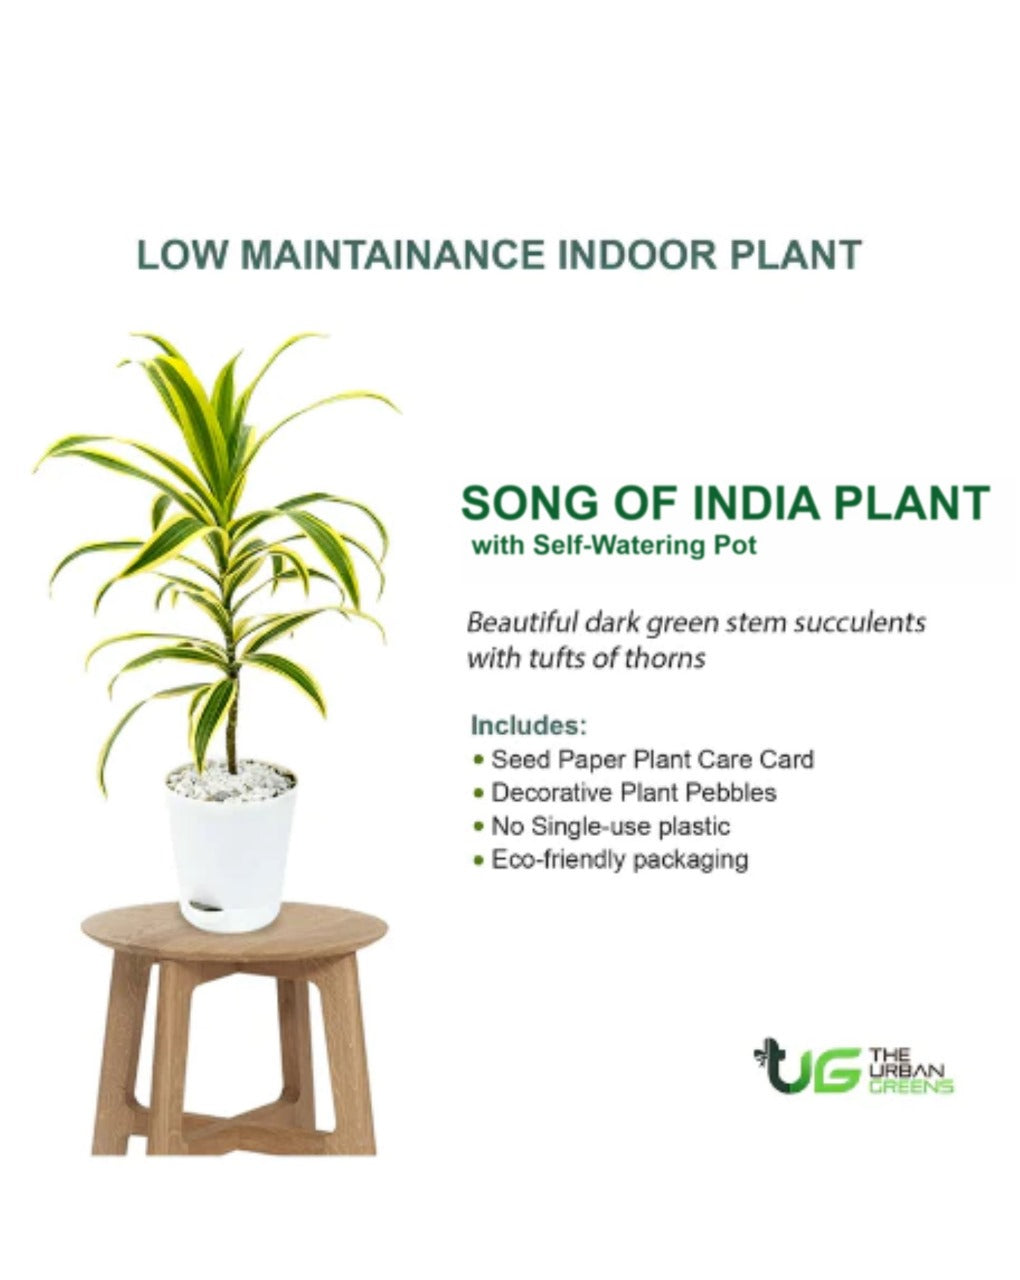 Song of India Plant